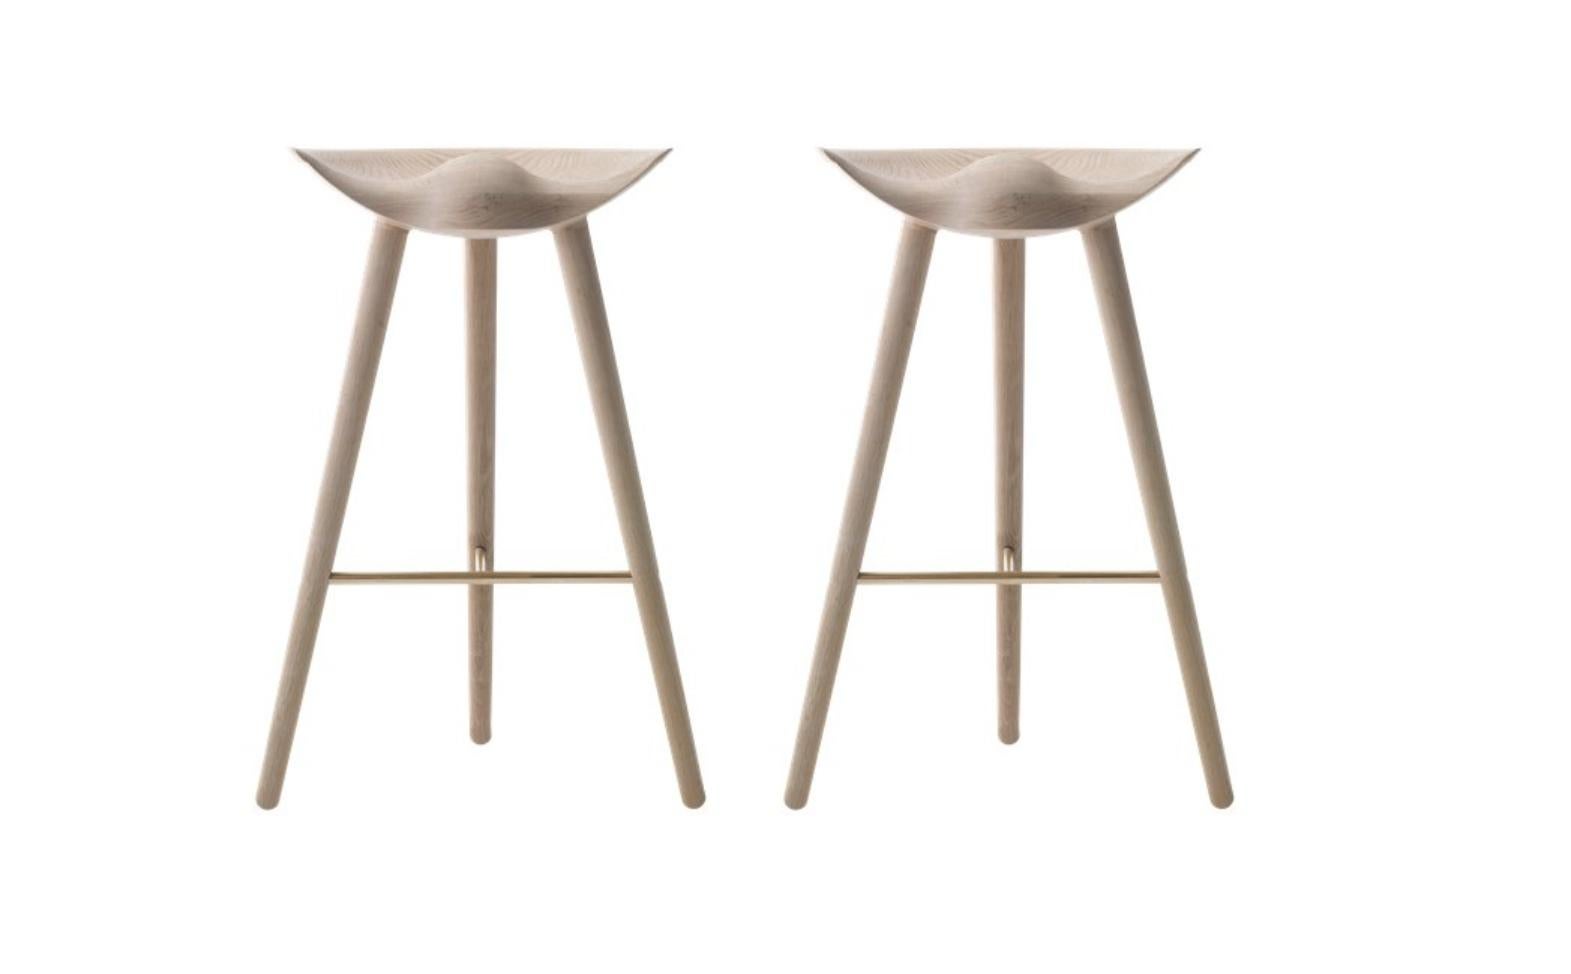 Set of 2 ML 42 oak and brass bar stools by Lassen
Dimensions: H 77 x W 36 x L 55.5 cm
Materials: Oak, Brass

In 1942 Mogens Lassen designed the Stool ML42 as a piece for a furniture exhibition held at the Danish Museum of Decorative Art. He took